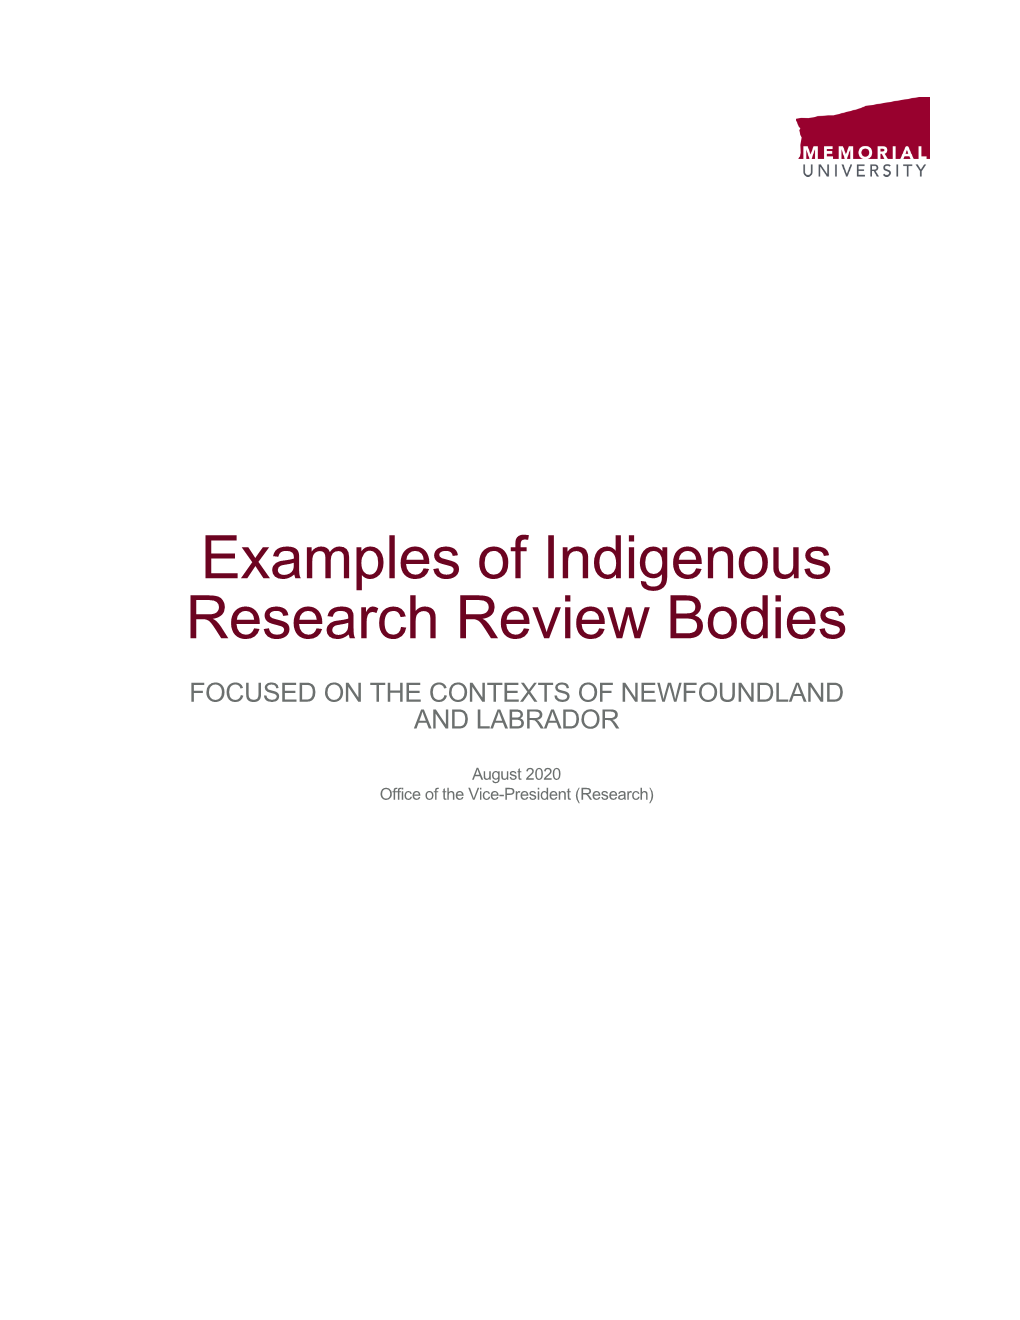 Examples of Indigenous Research Review Bodies Focused on The